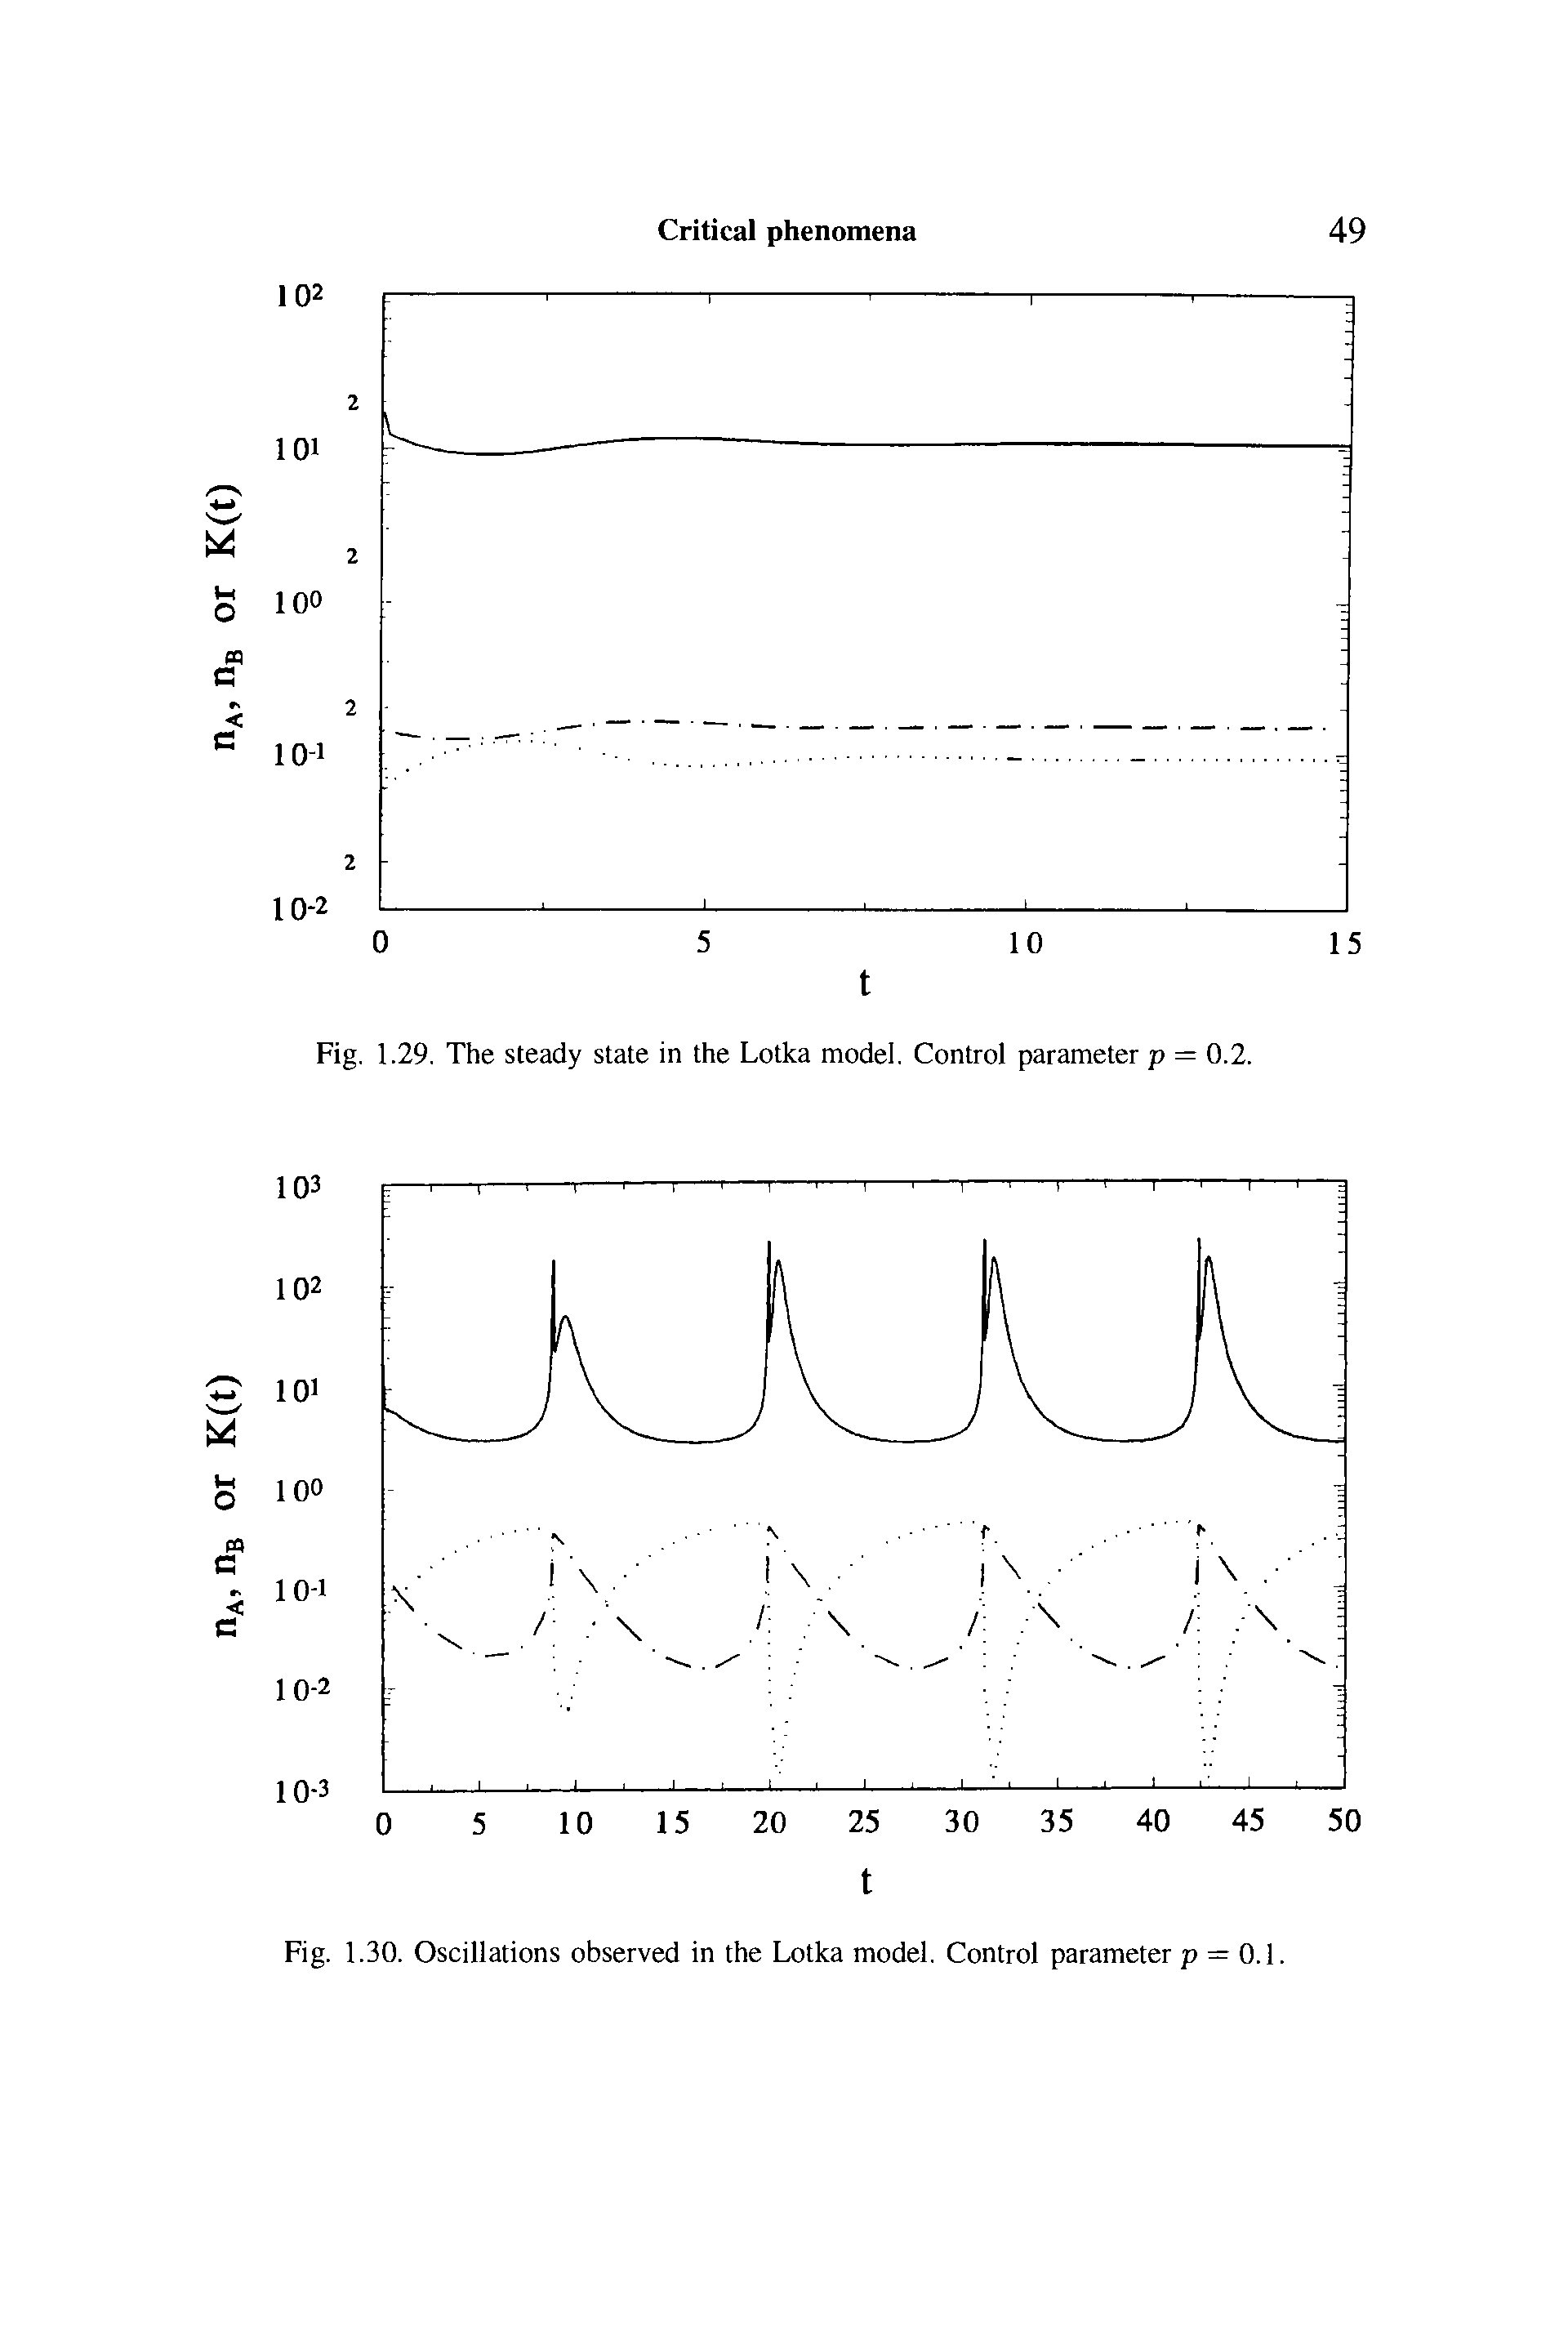 Fig. 1.29. The steady state in the Lotka model. Control parameter p = 0.2.